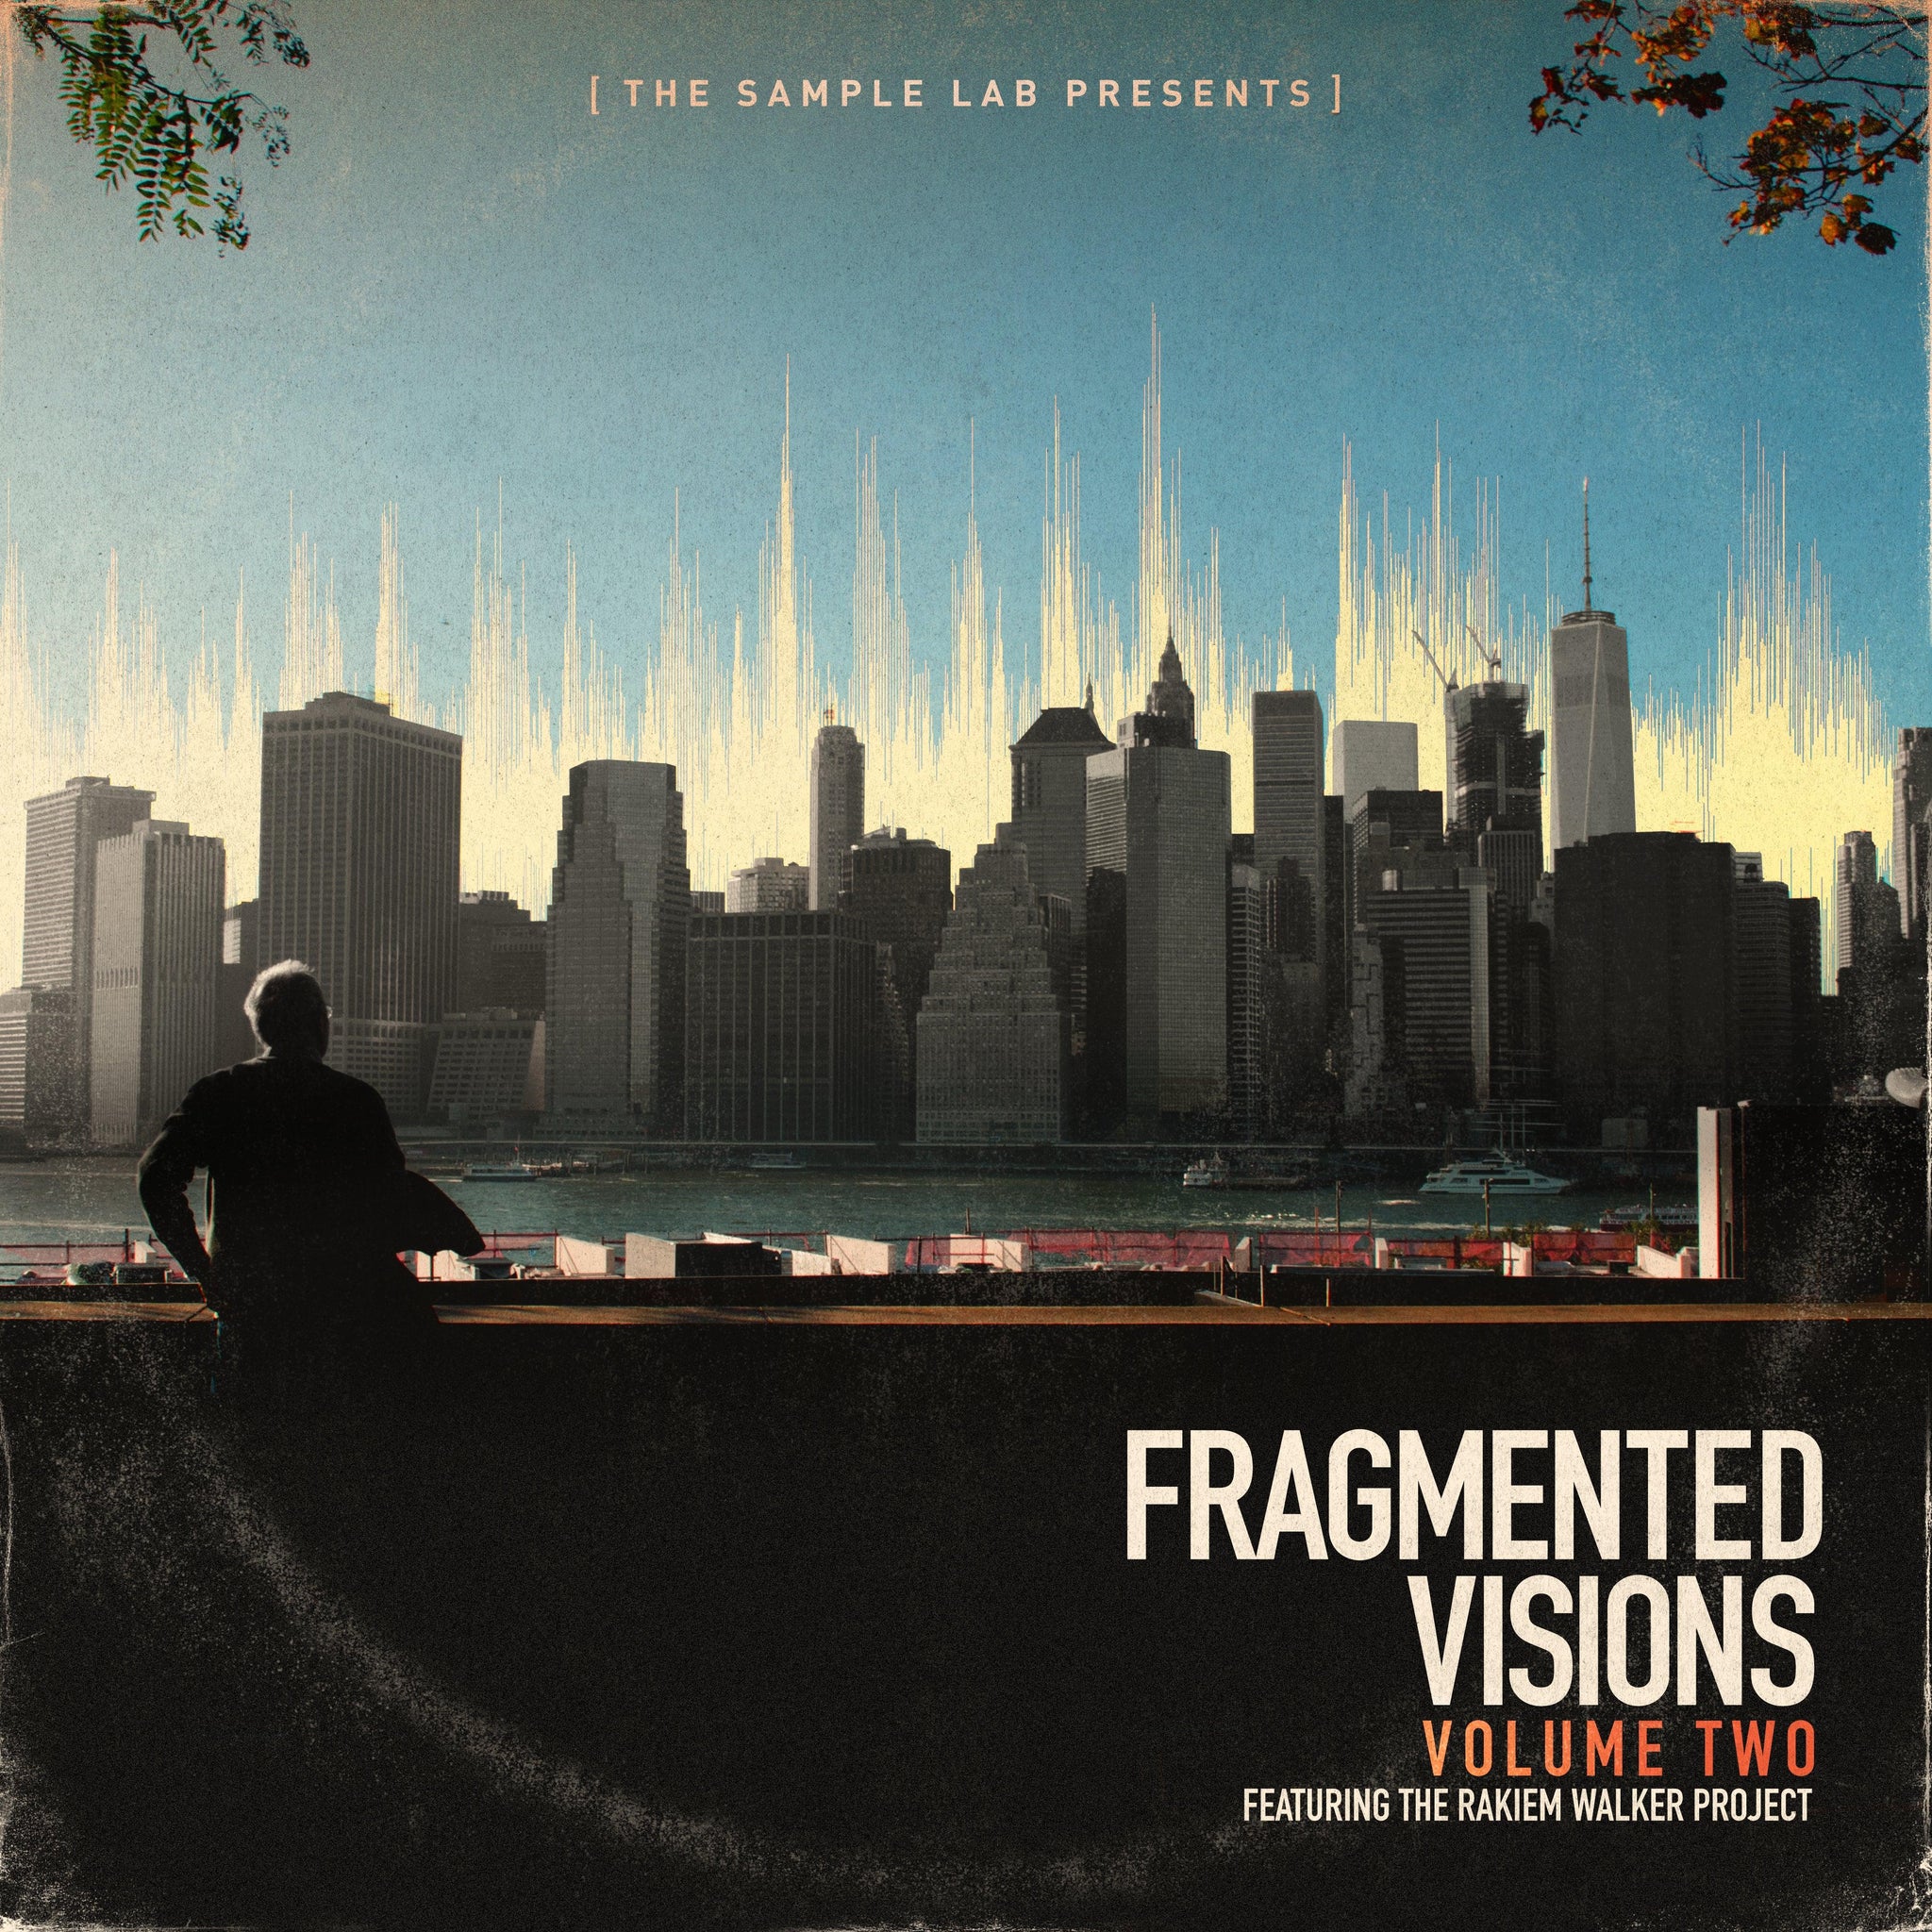 Fragmented Visions Vol. 2 (Remastered) - The Sample Lab